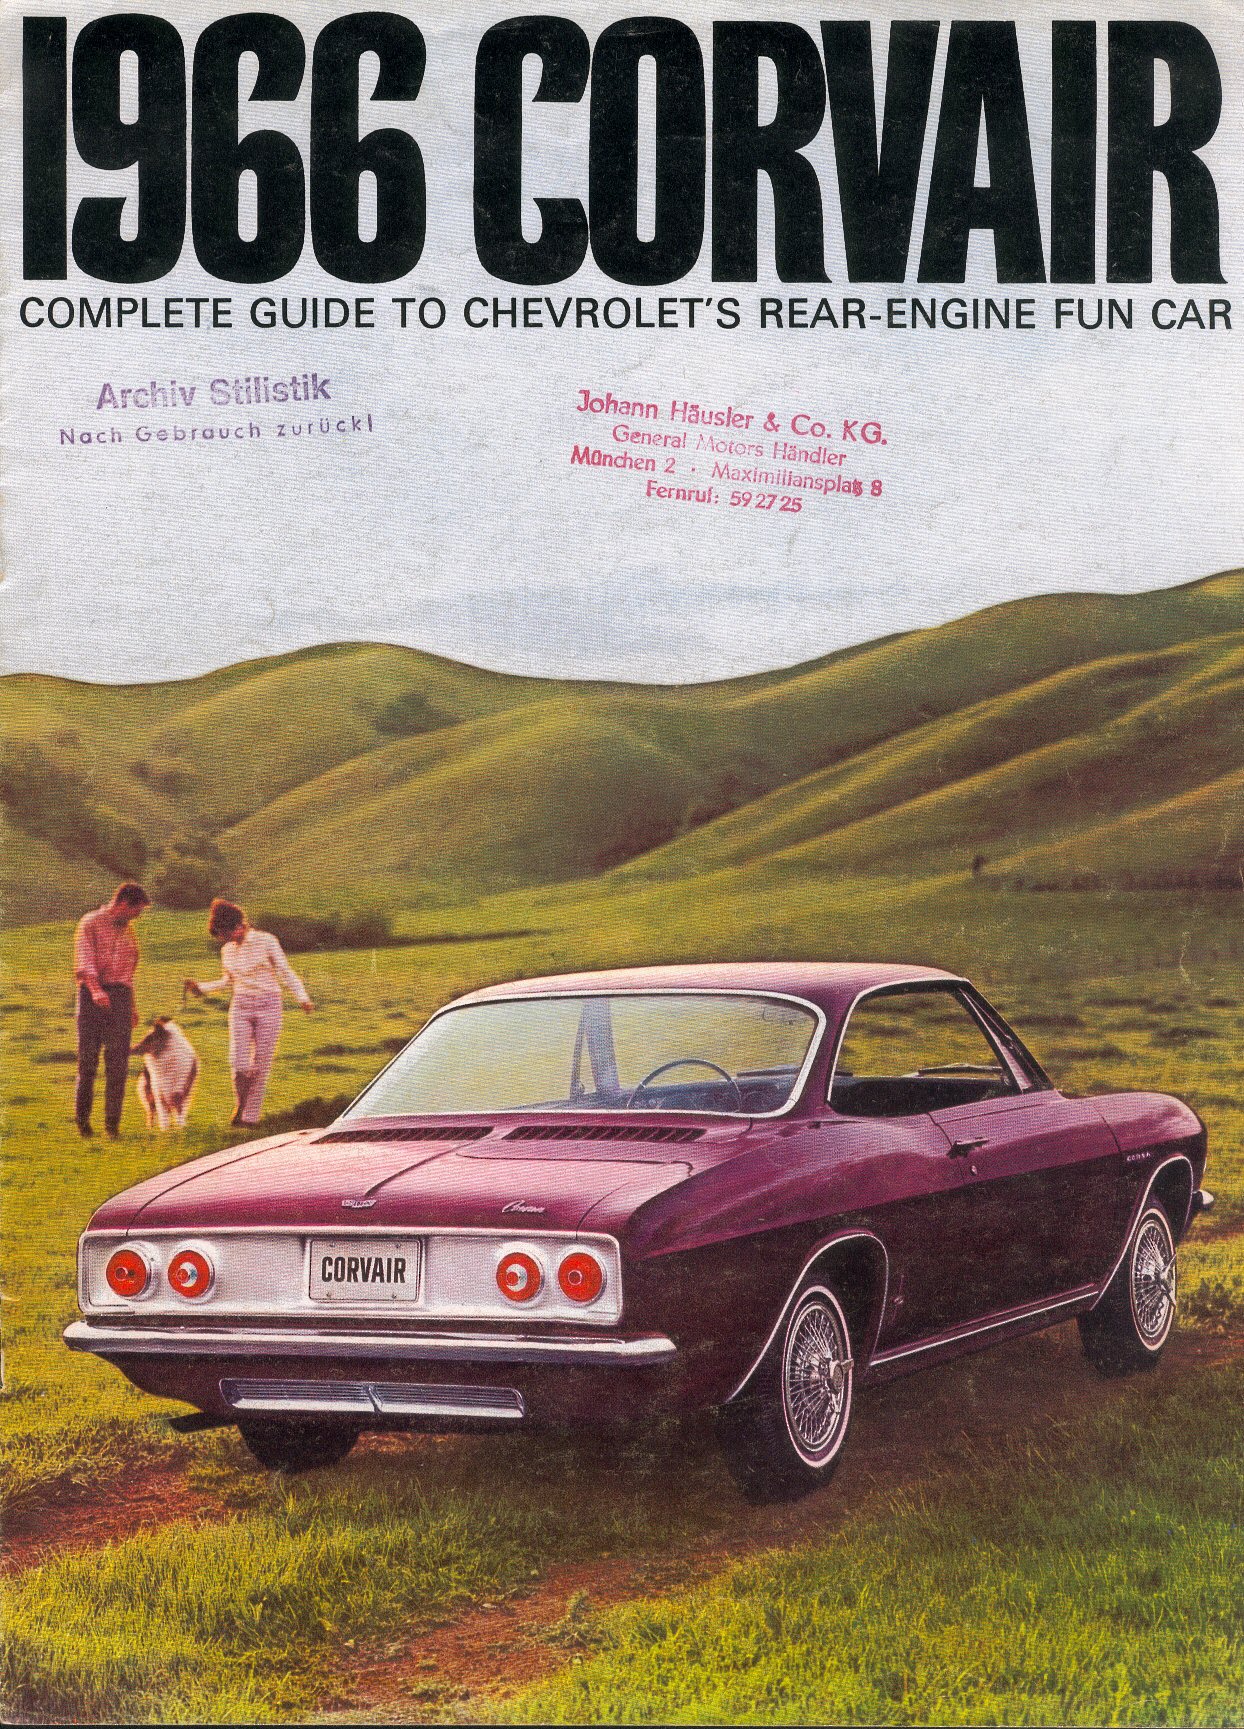 1966 Chevrolet Corvair Brochure Page 6